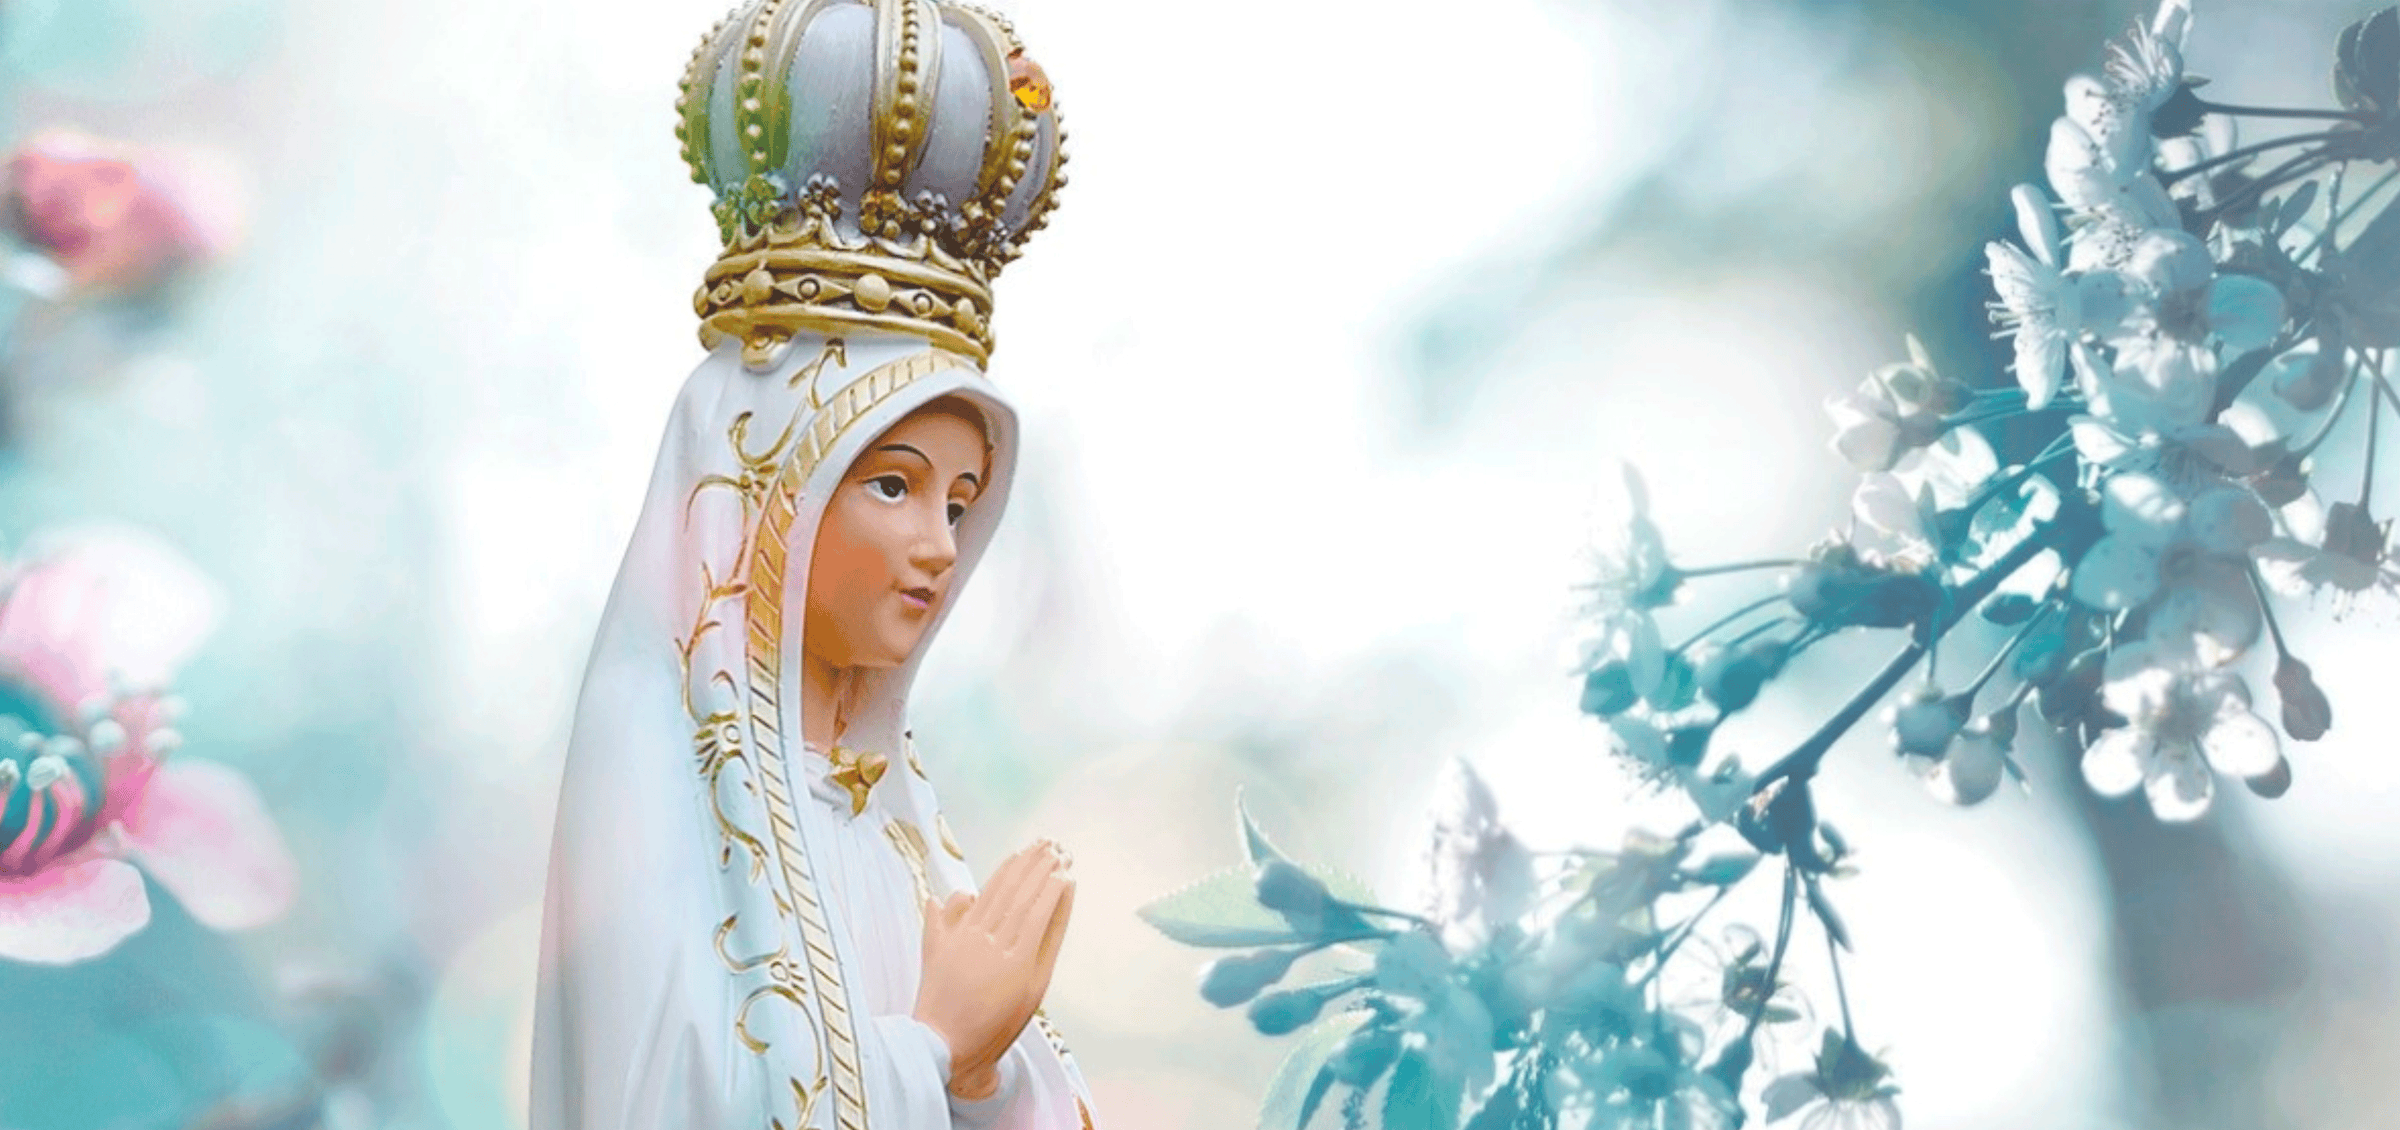 Presented in a variety of sizes to fit your needs, We Are Portugal brings to the United States the most beautiful Fátima statues, hand painted by the same artisans that craft the official images to the Shrine of Fátima.